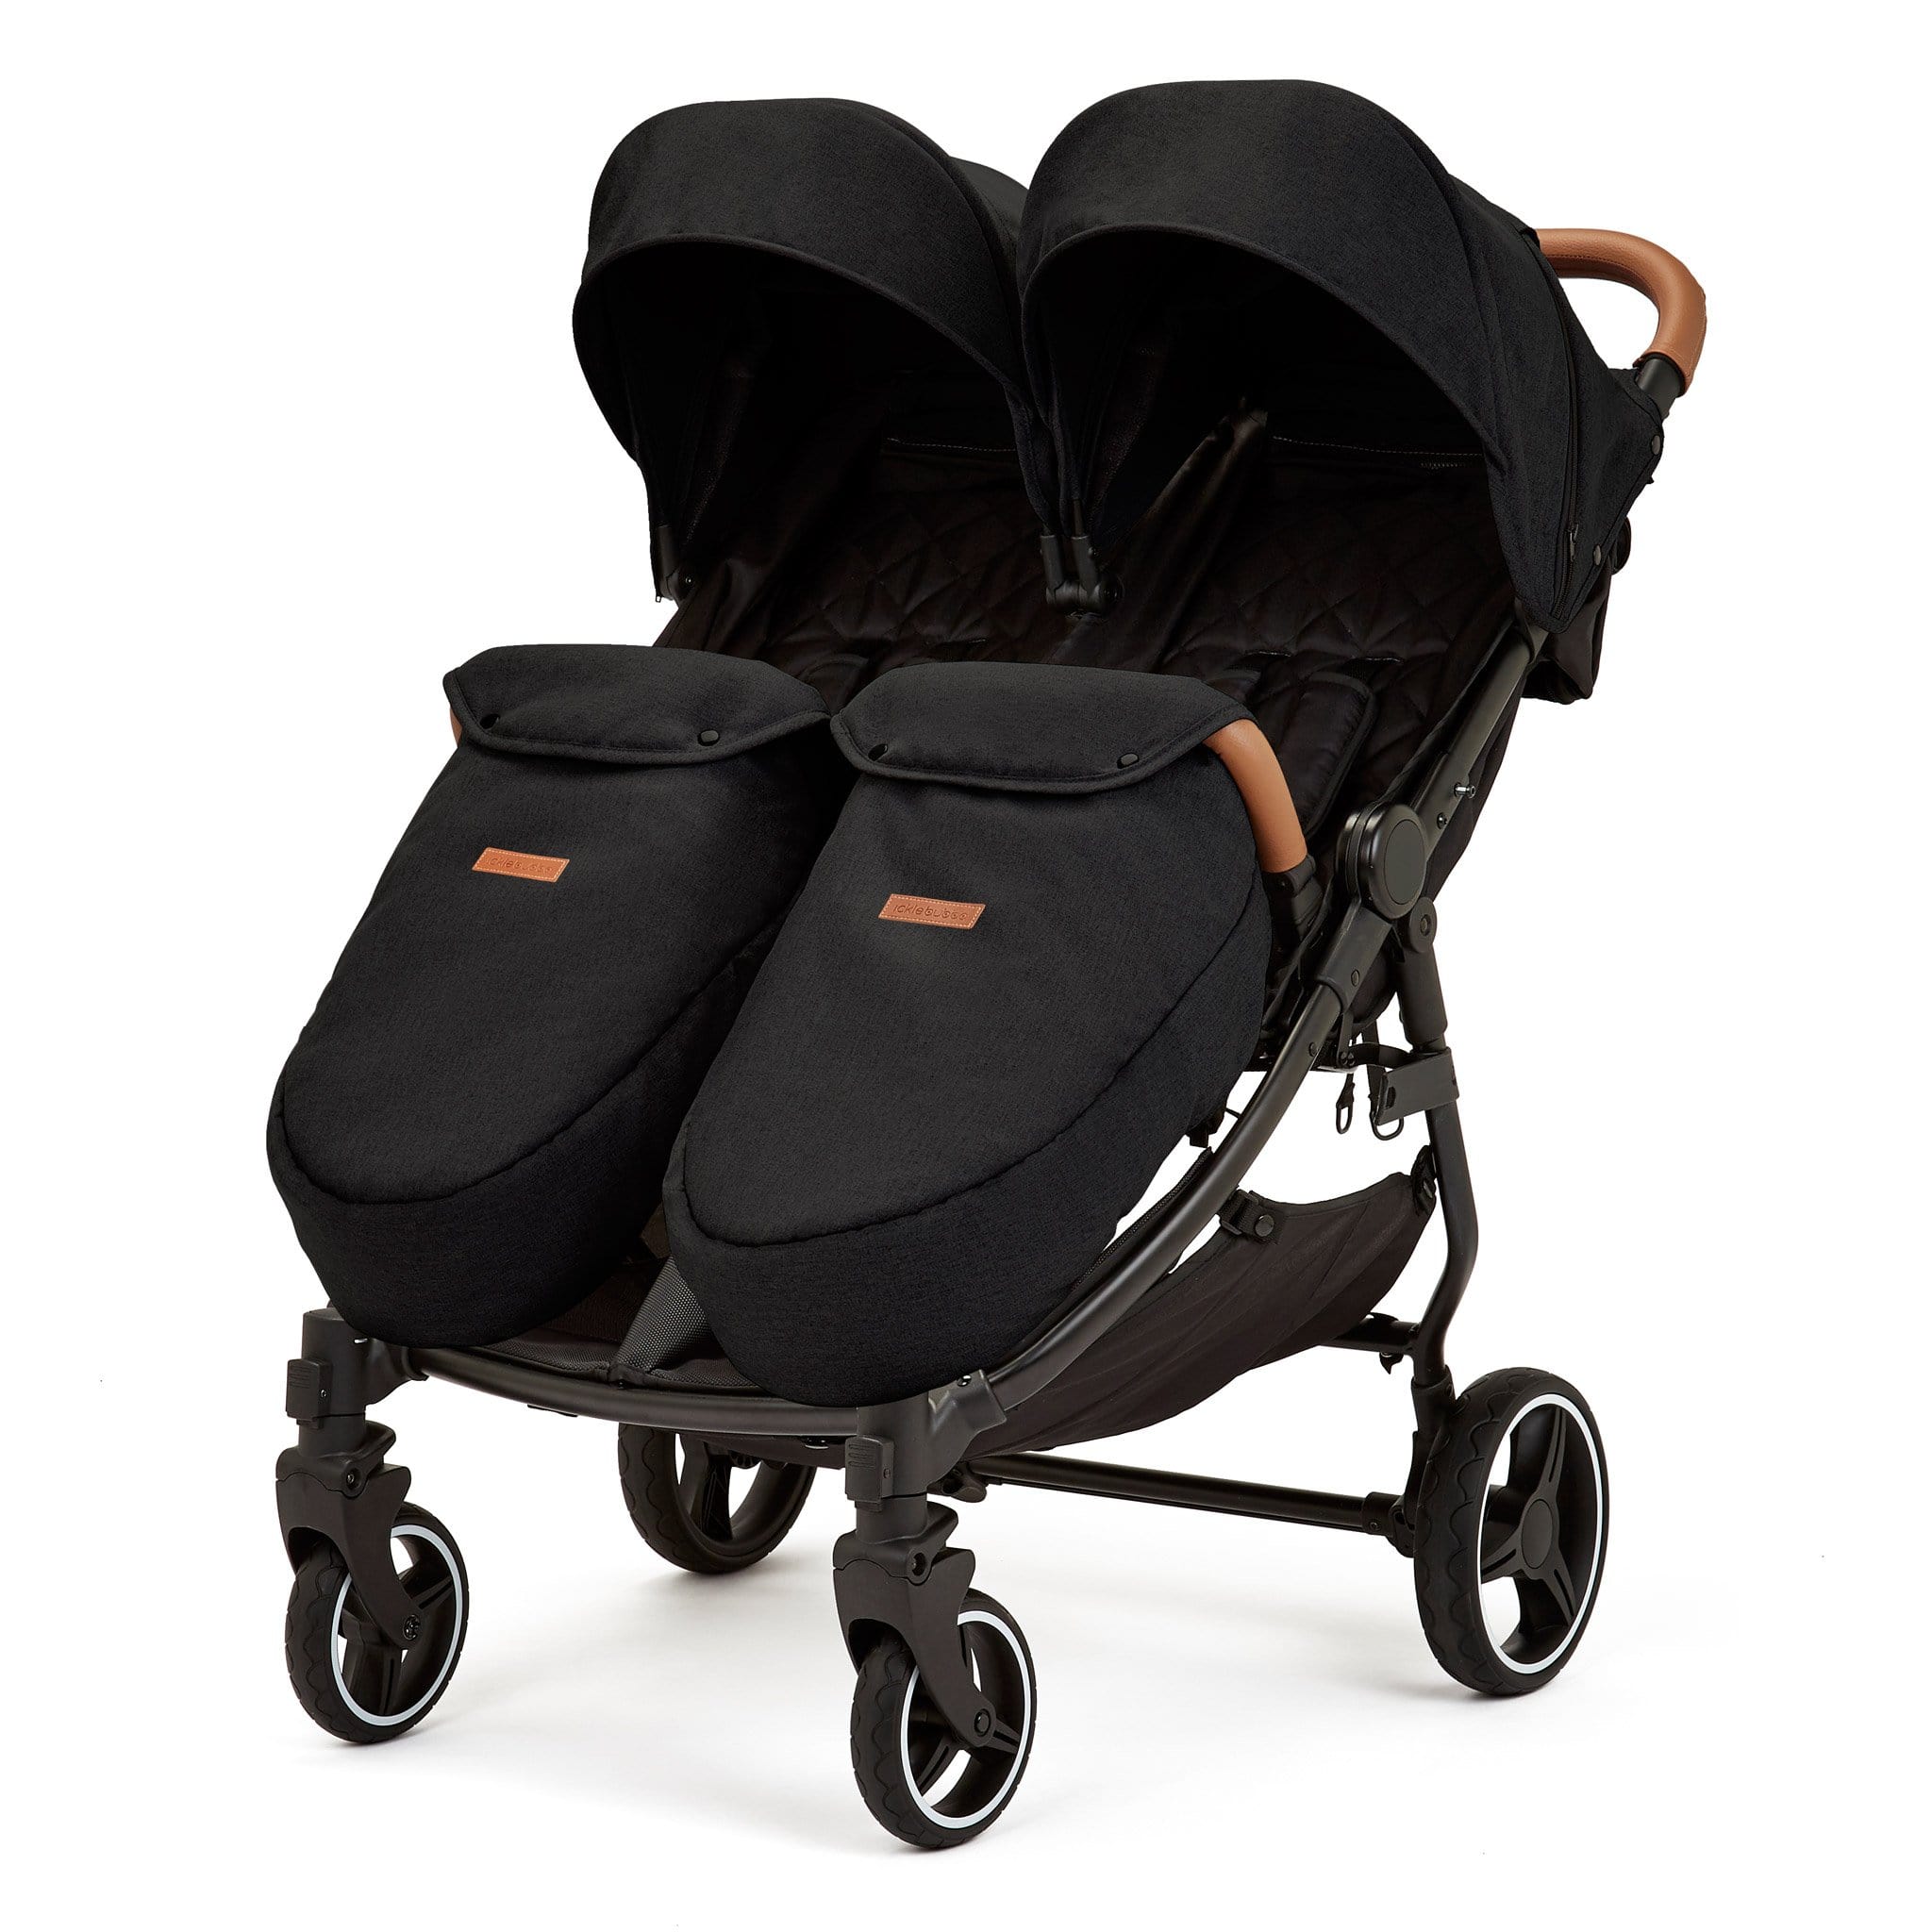 Ickle Bubba double buggies Ickle Bubba Venus Max Double Stroller Black/Black/Tan 16-004-200-003